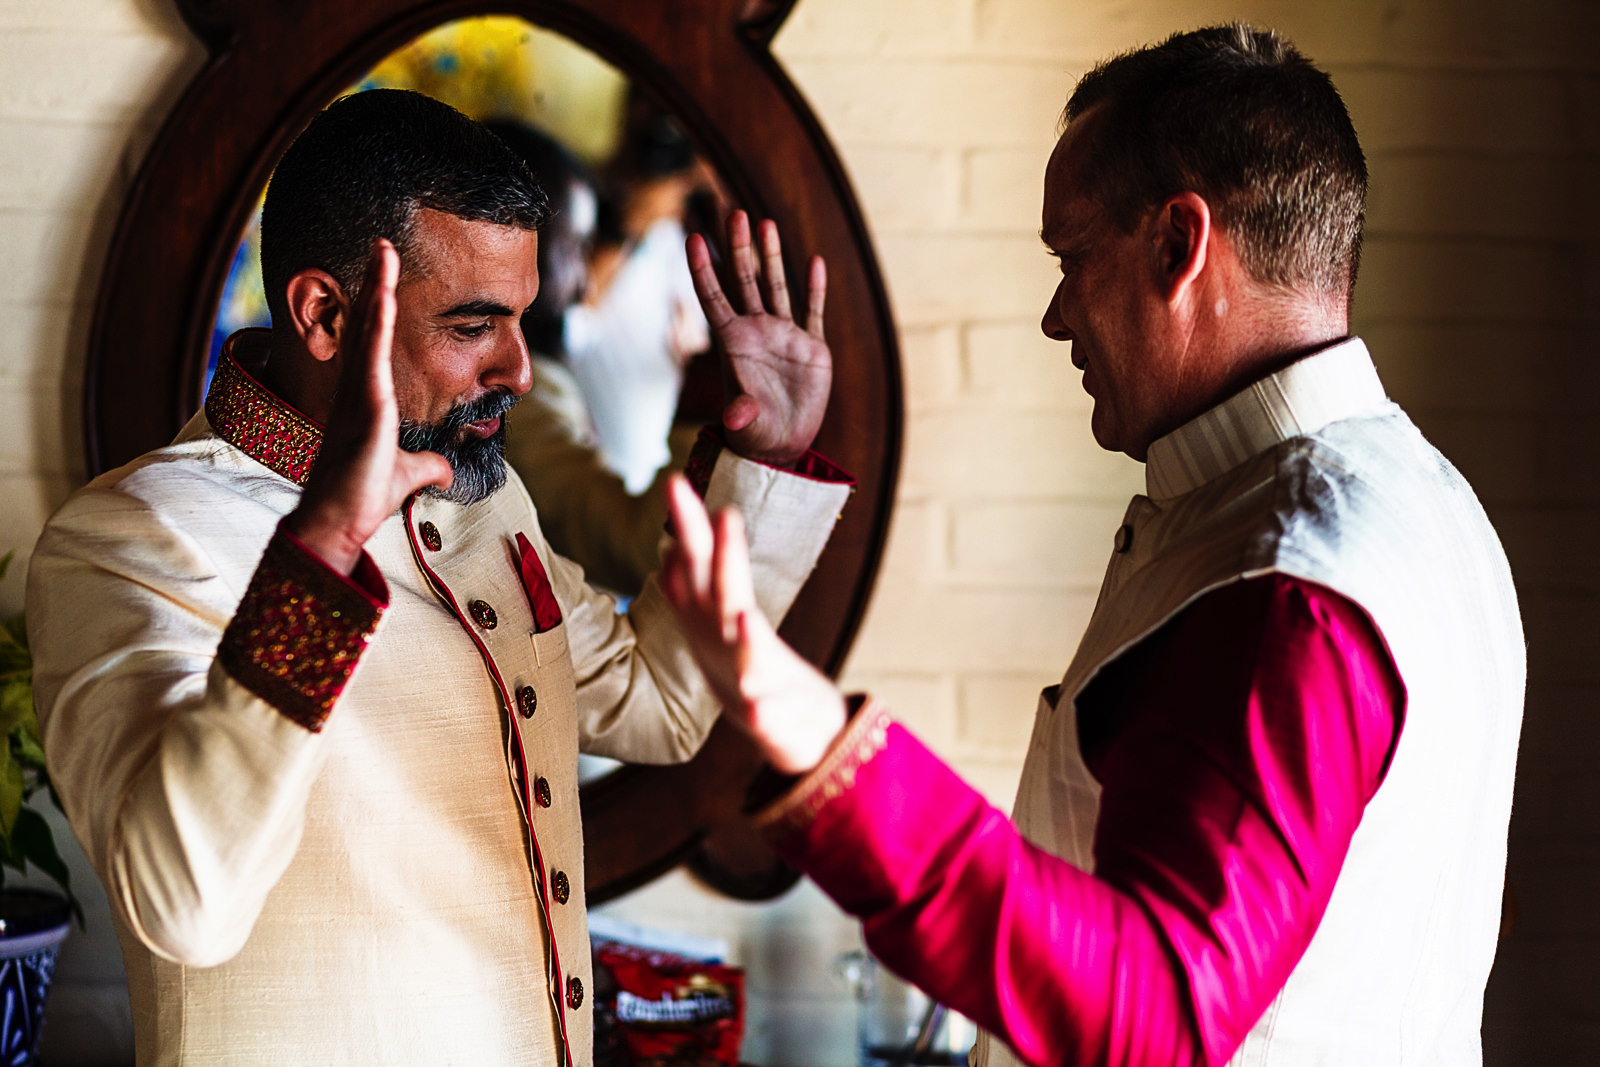 Hands explote as part of the groom and best man preparation ritual